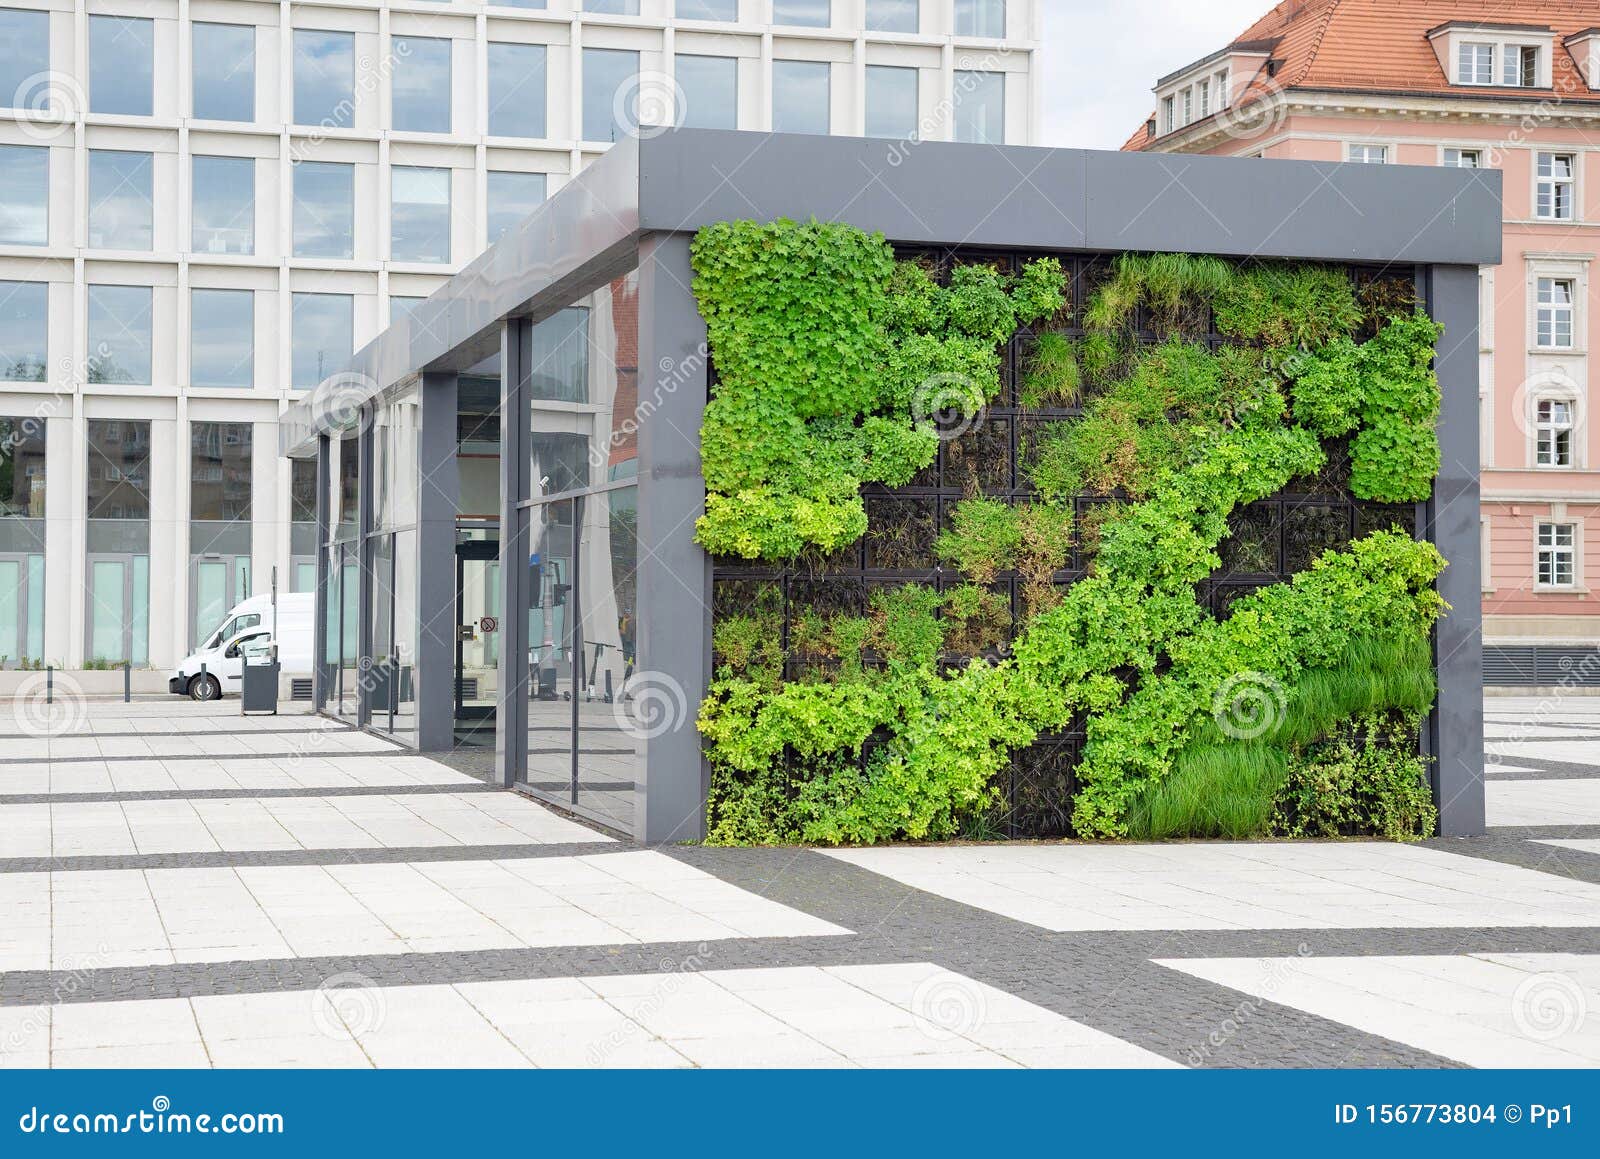 green cooling air wall cleaning facade vertical gardening eco friendly city modern architecture 